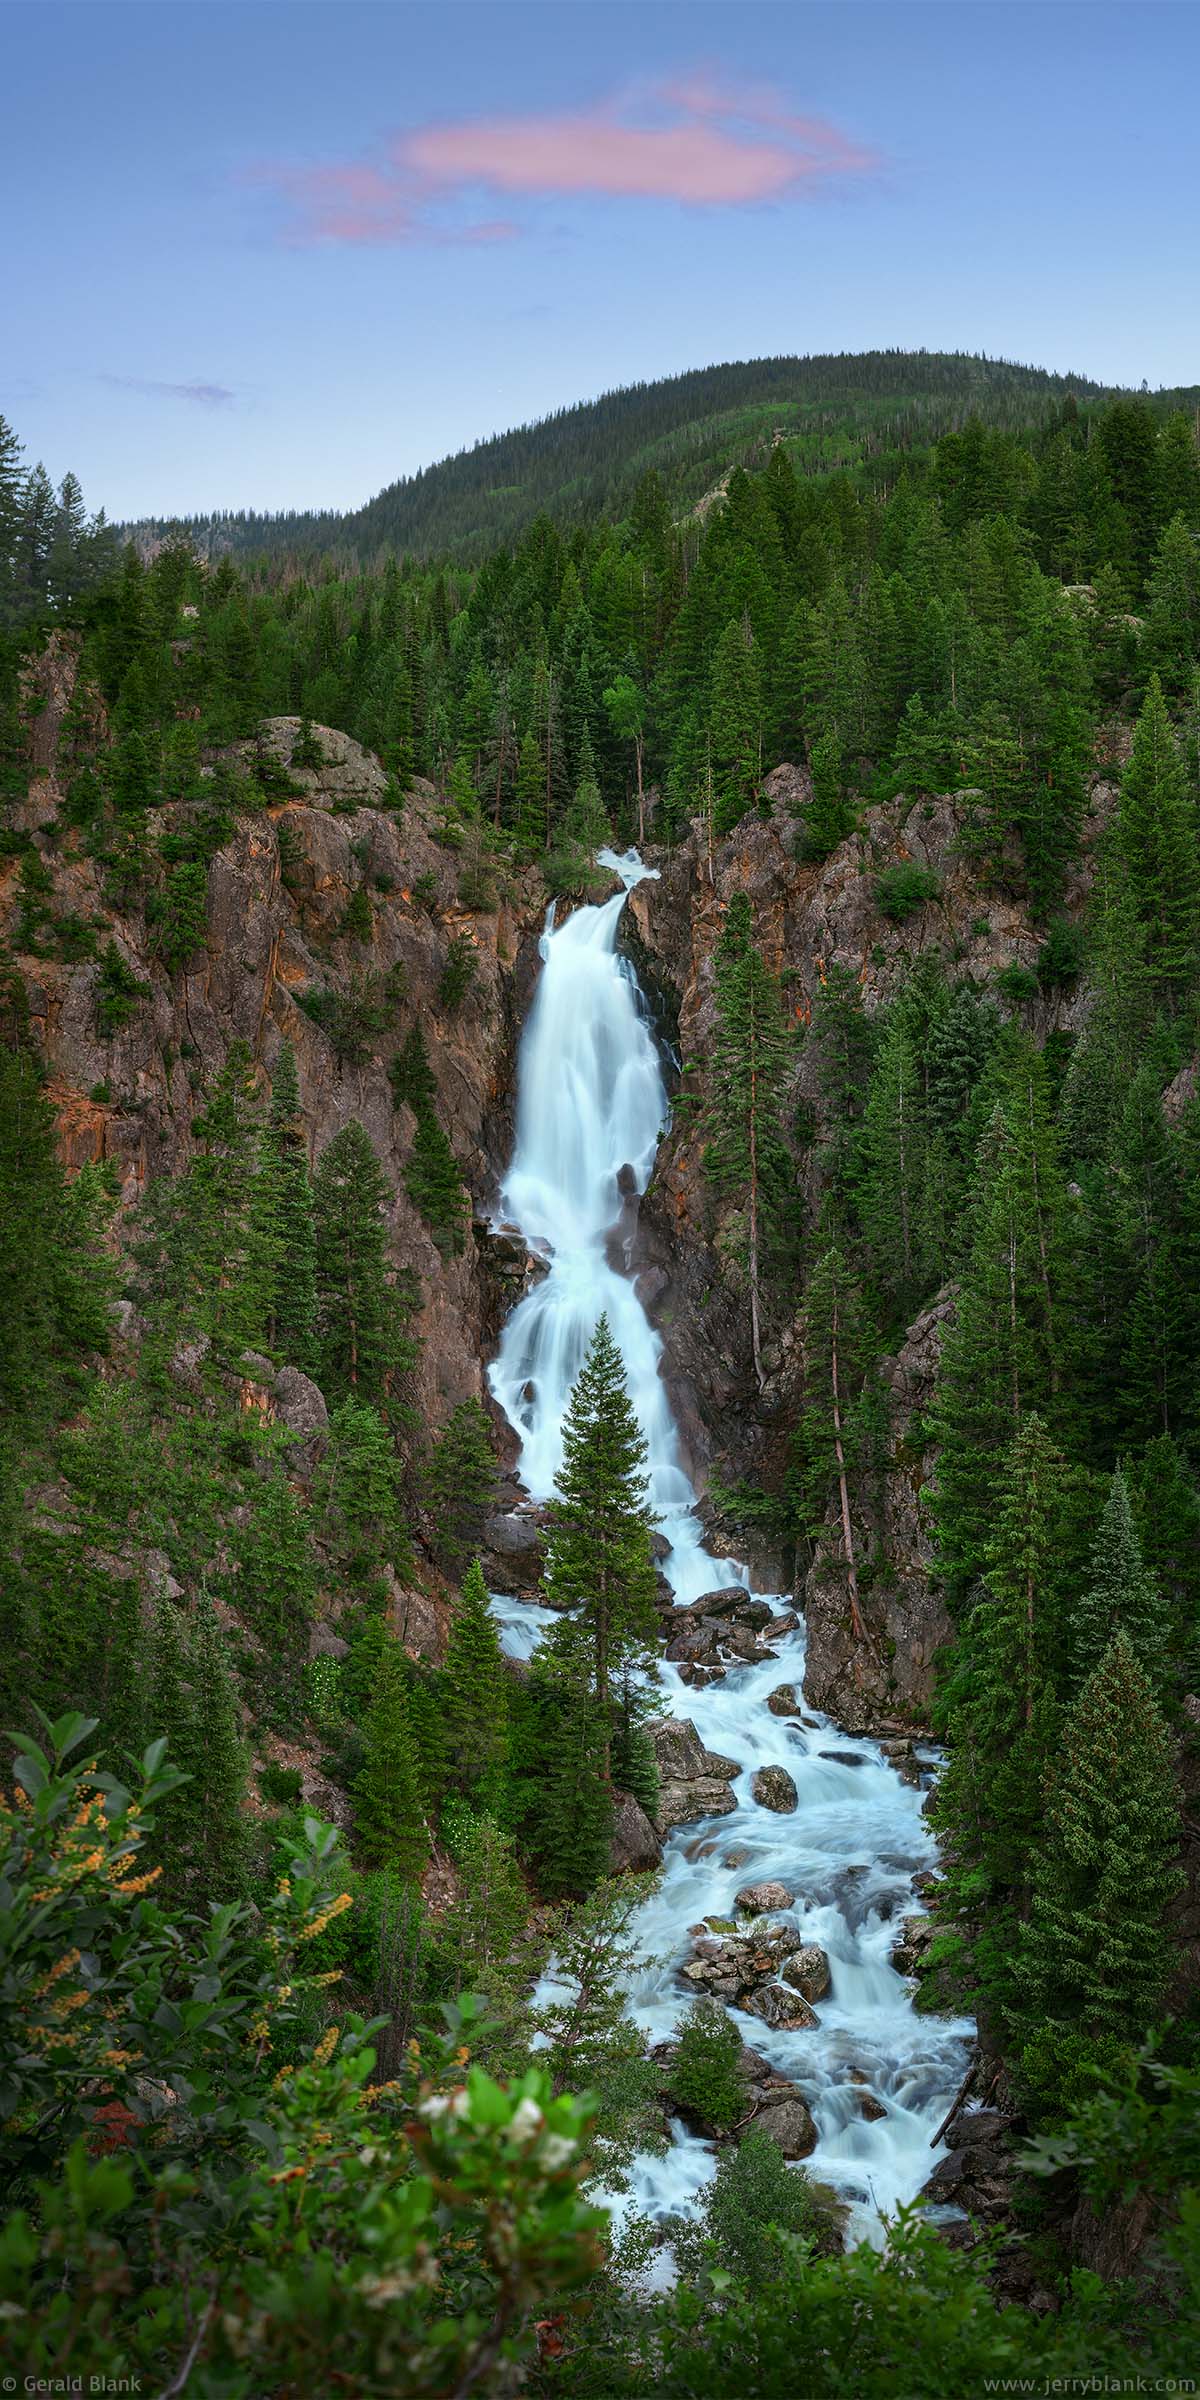 #54745 - An evening view of scenic Fish Creek Falls, located in the Routt National Forest just outside Steamboat Springs, Colorado - photo by Jerry Blank